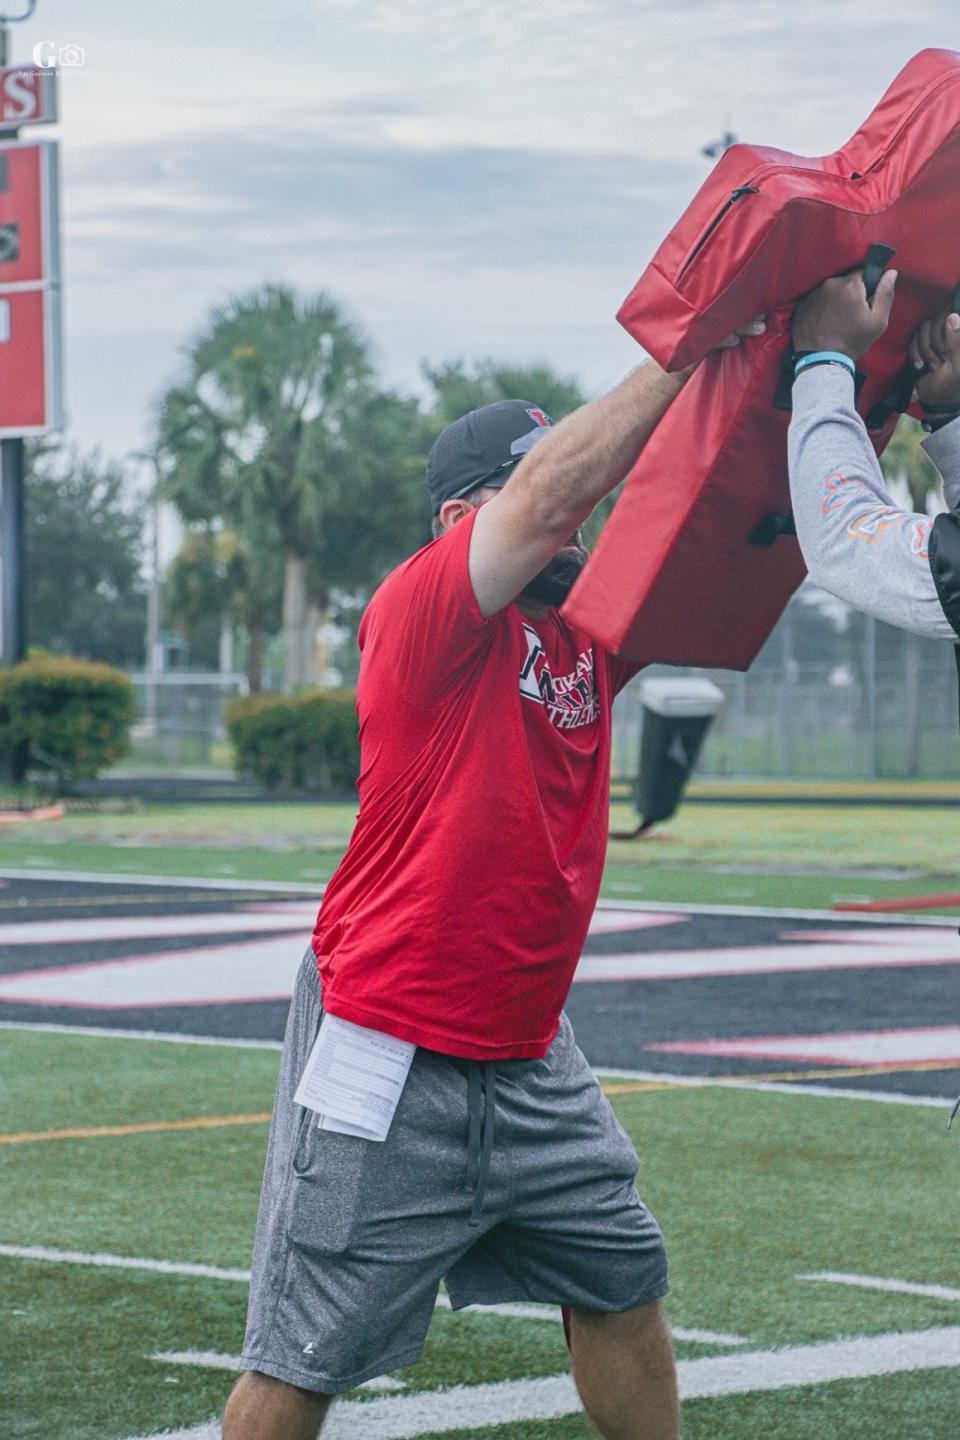 Golden Gate hired Nick Citro as its next head football coach in January. The 34-year-old previous was a dual coordinator at Immokalee and a defensive assistant at Palmetto Ridge. Citro is set to succeed Nick Bigica, who led the program for five seasons.